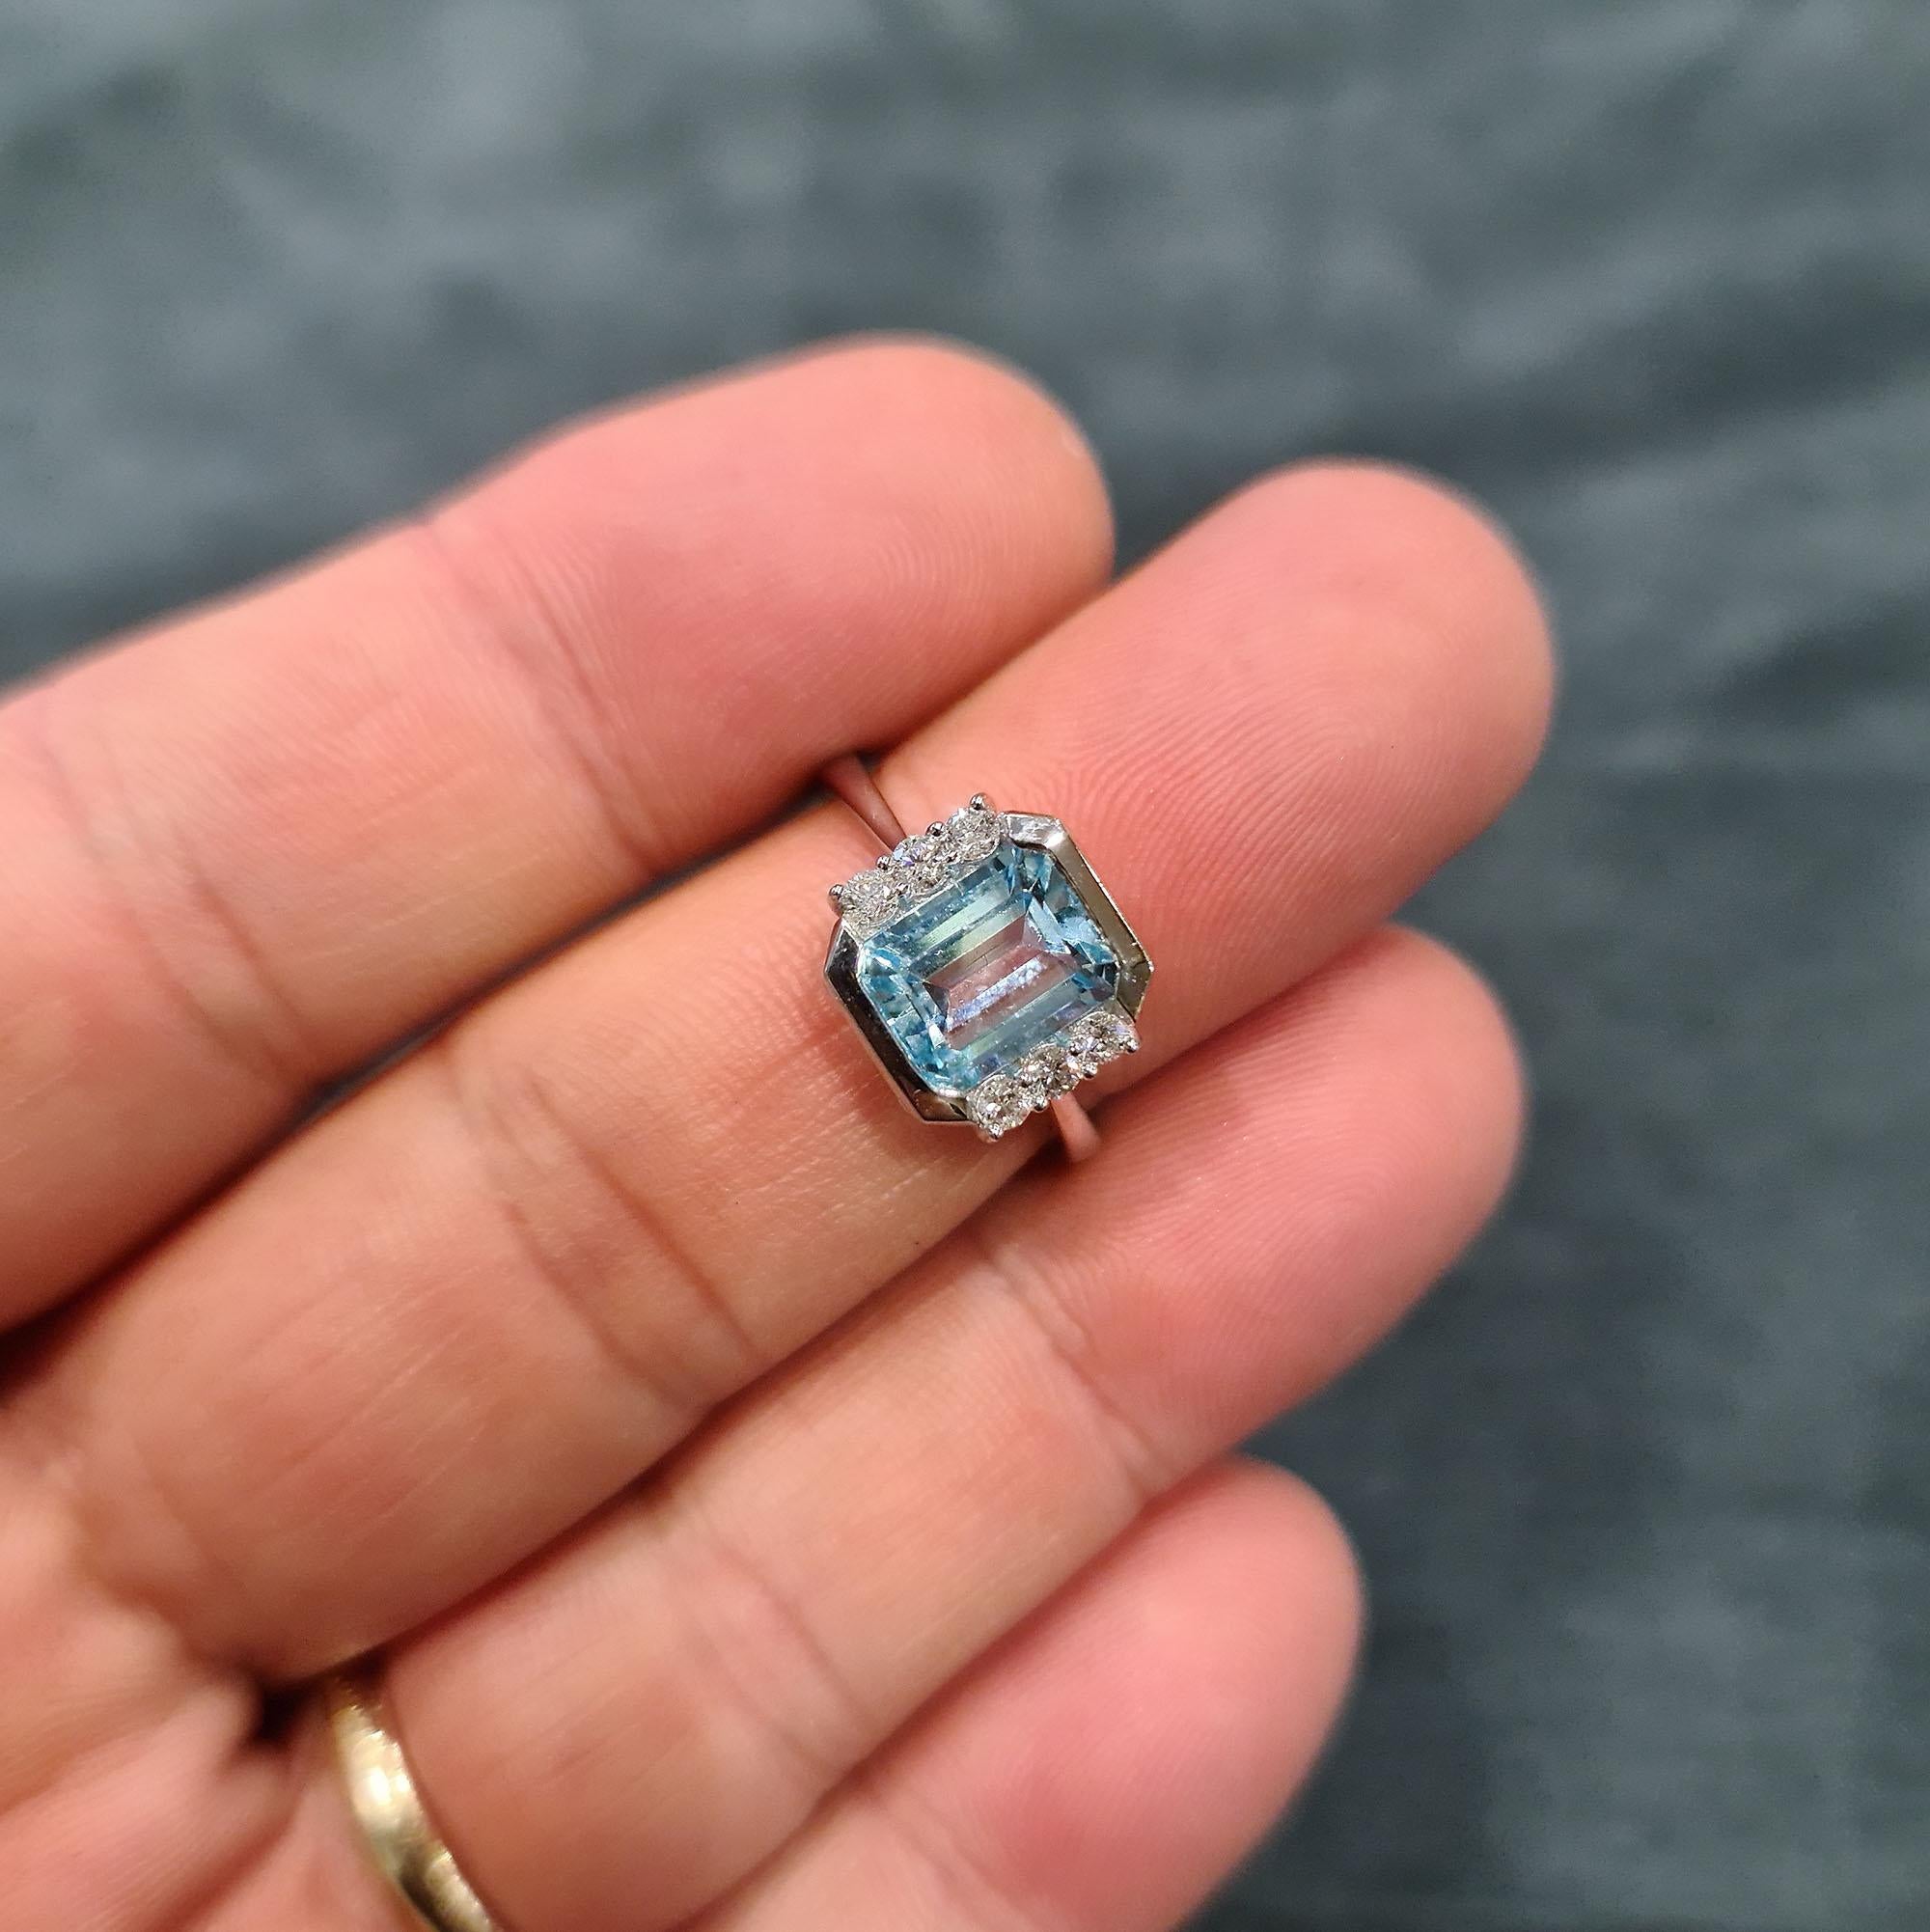 A fine and impressive modern dress / cocktail ring in 18-carat white gold. The bright and lively central emerald-cut aquamarine, mounted in a bezel setting, flanked at each side by three round-brilliant-cut diamonds. Polished 18-carat white gold